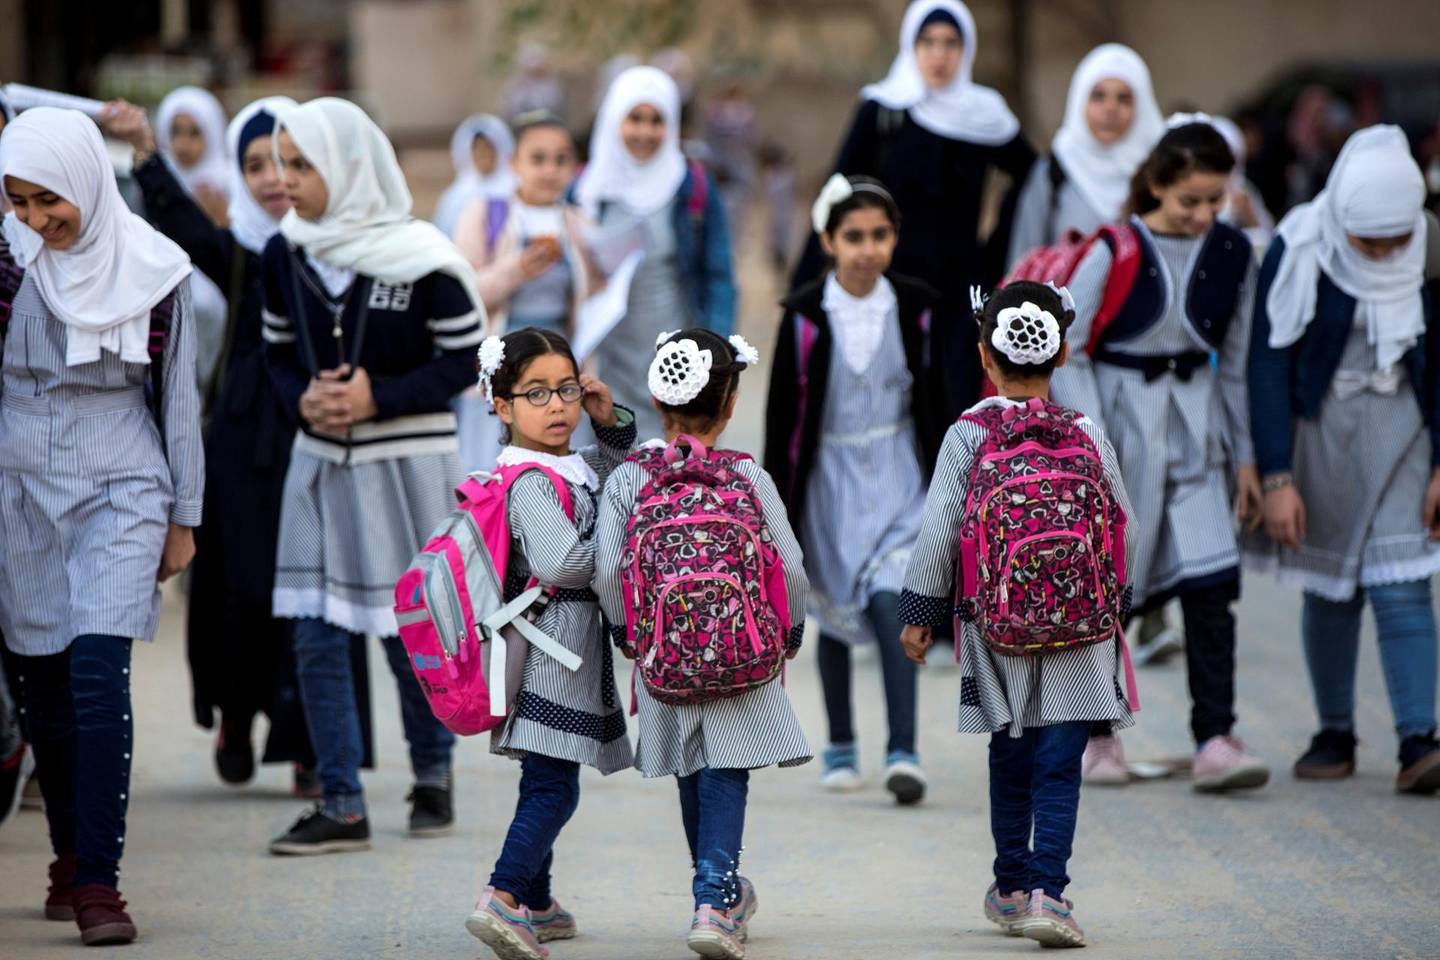 Palestinian school girls of all ages on their way to school in the southern Gazan city of Khan Younis on November 4,2018. (Photo by Heidi Levine for The National).